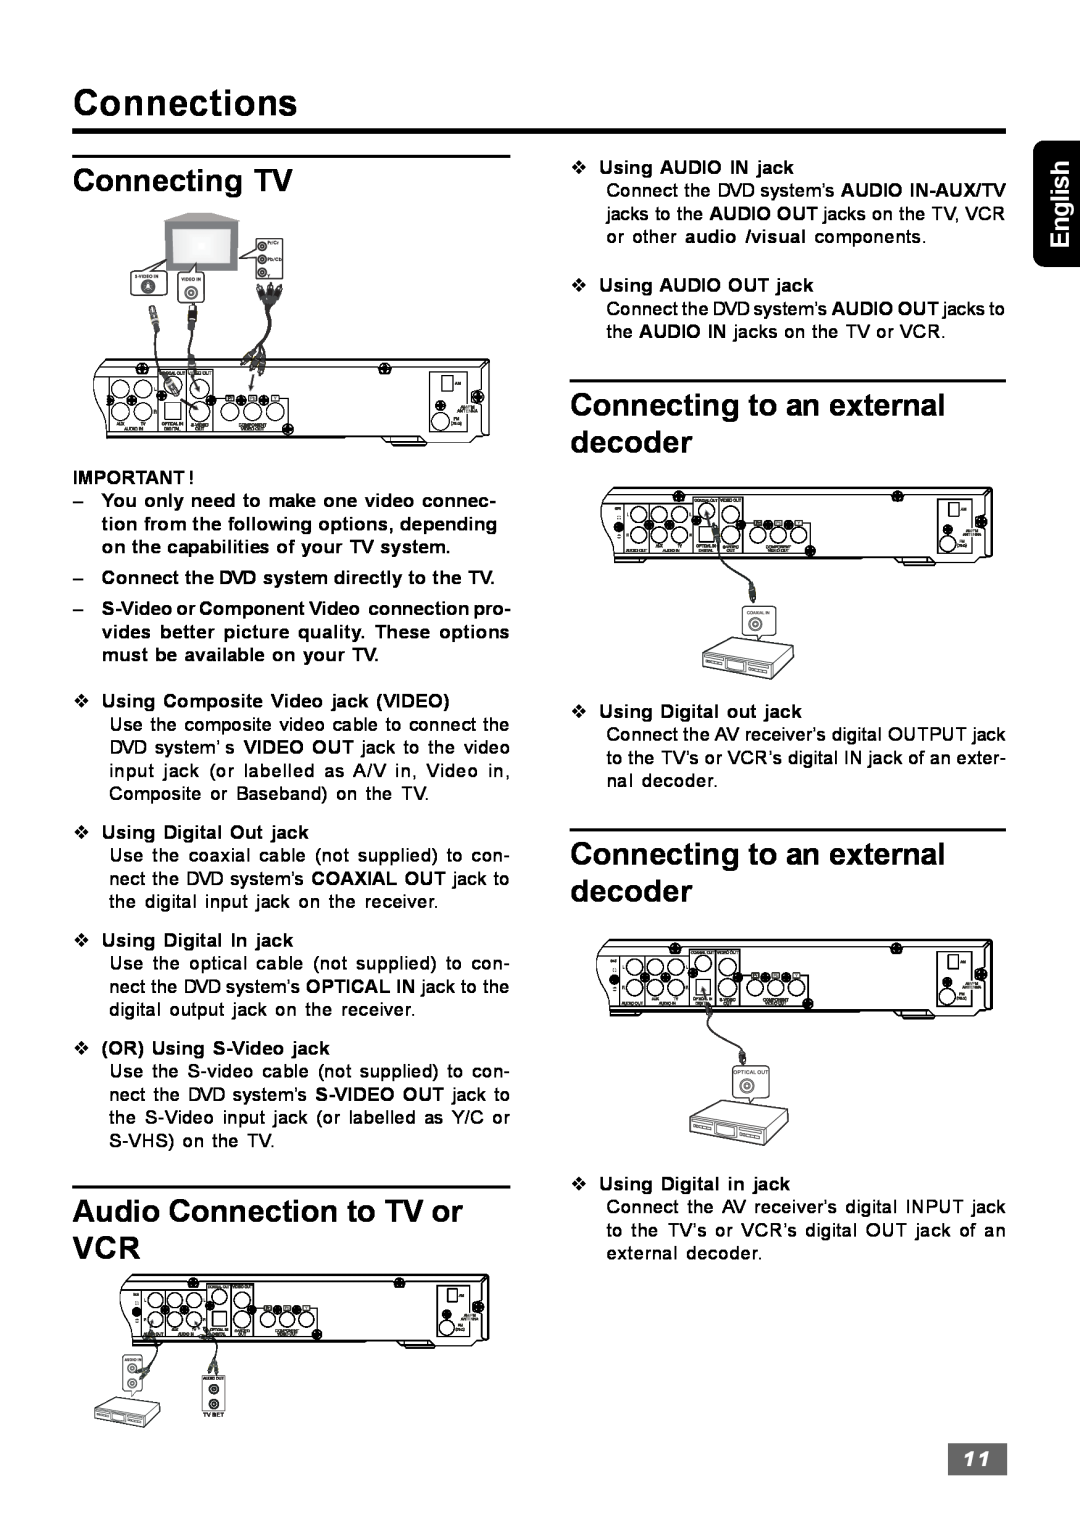 Insignia IS-HTIB102731 Connecting TV, Audio Connection to TV or VCR, Connecting to an external decoder, Connections 